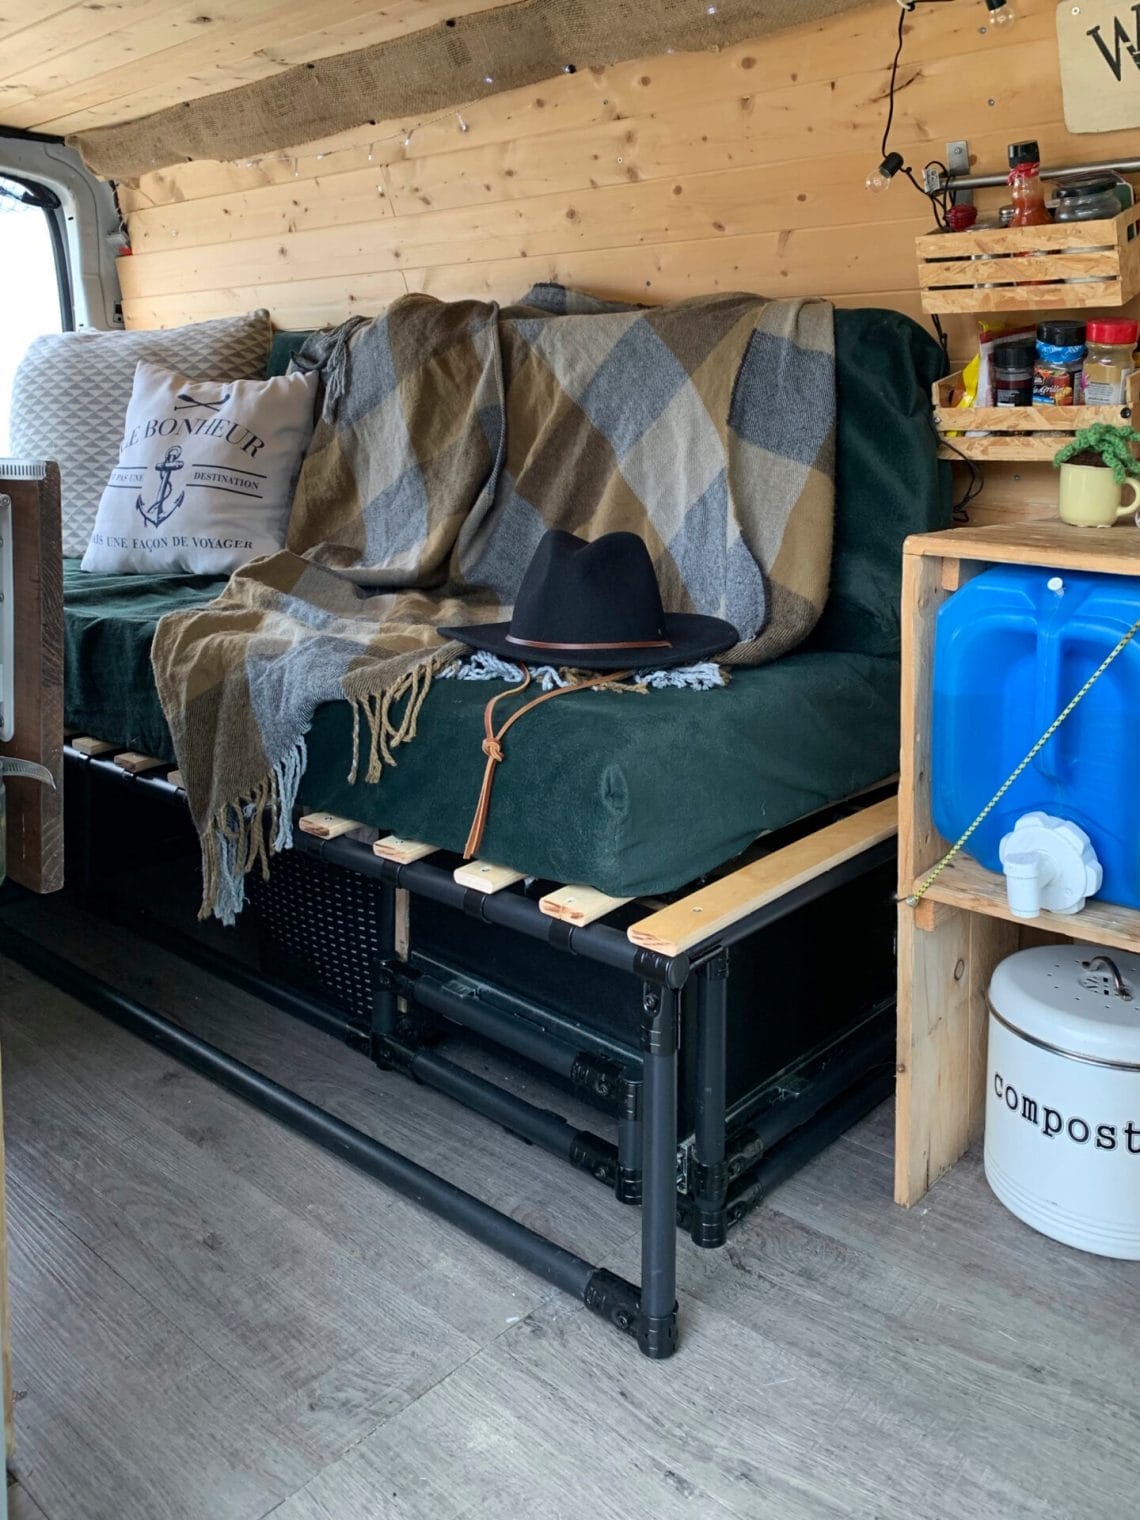 Vanlife - DIY sofa-bed frame with drawers